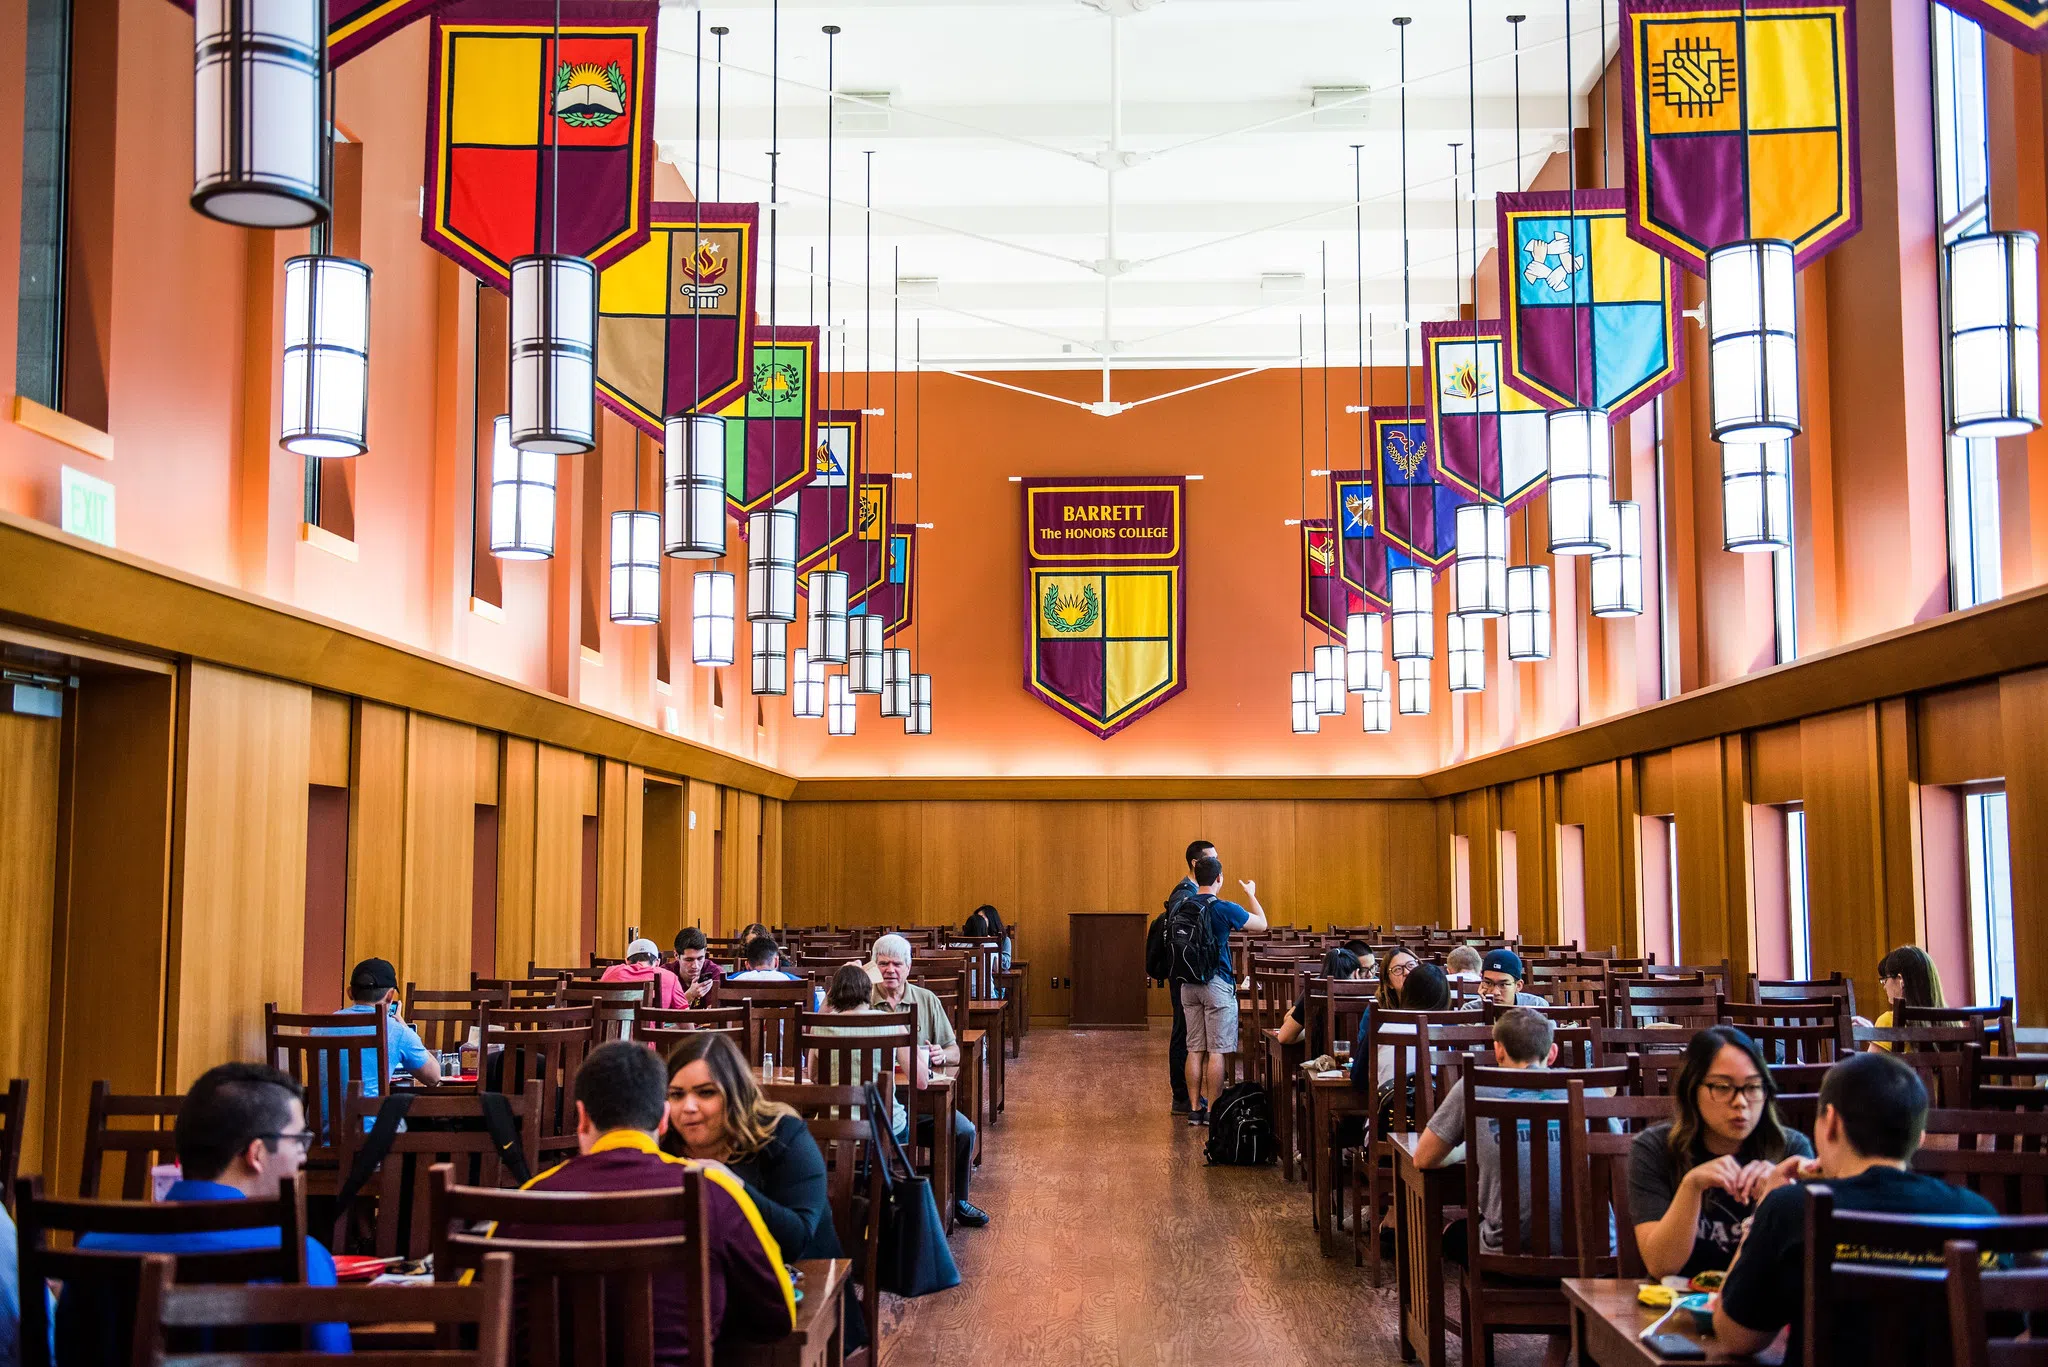 Students and faculty eating inside refectory of Barrett dining hall. Flags of each of ASU's colleges hang from the ceiling.